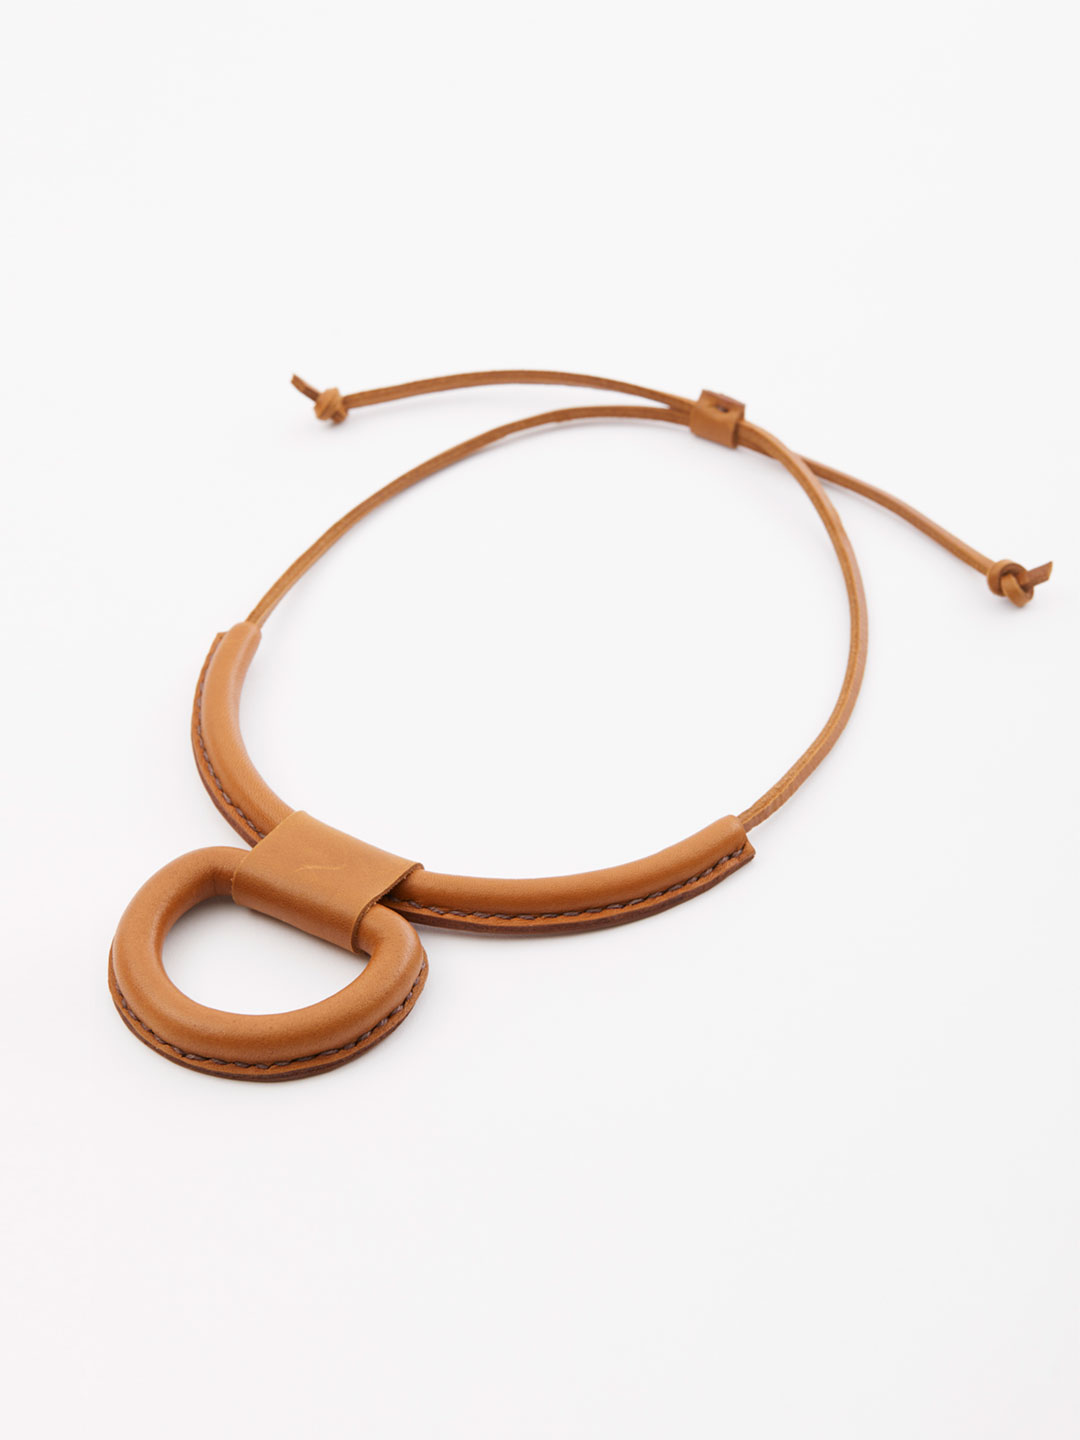 Union Necklace - Saddle Brown